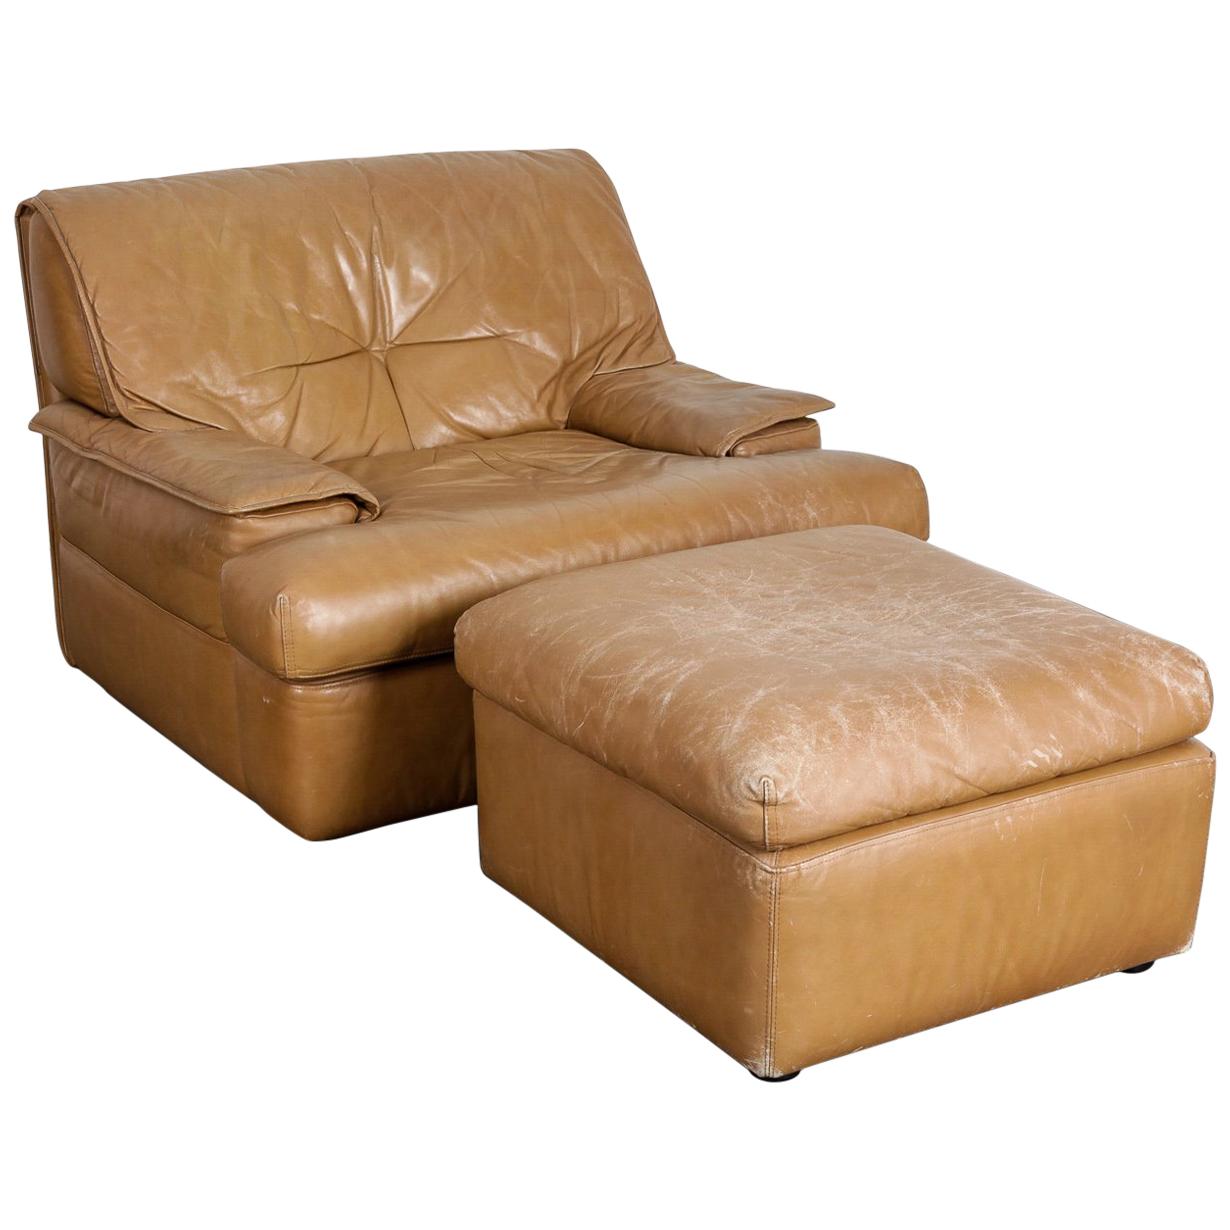 Pace Collection or i4 Mariani 'Monique' Tan Leather Lounge and Ottoman